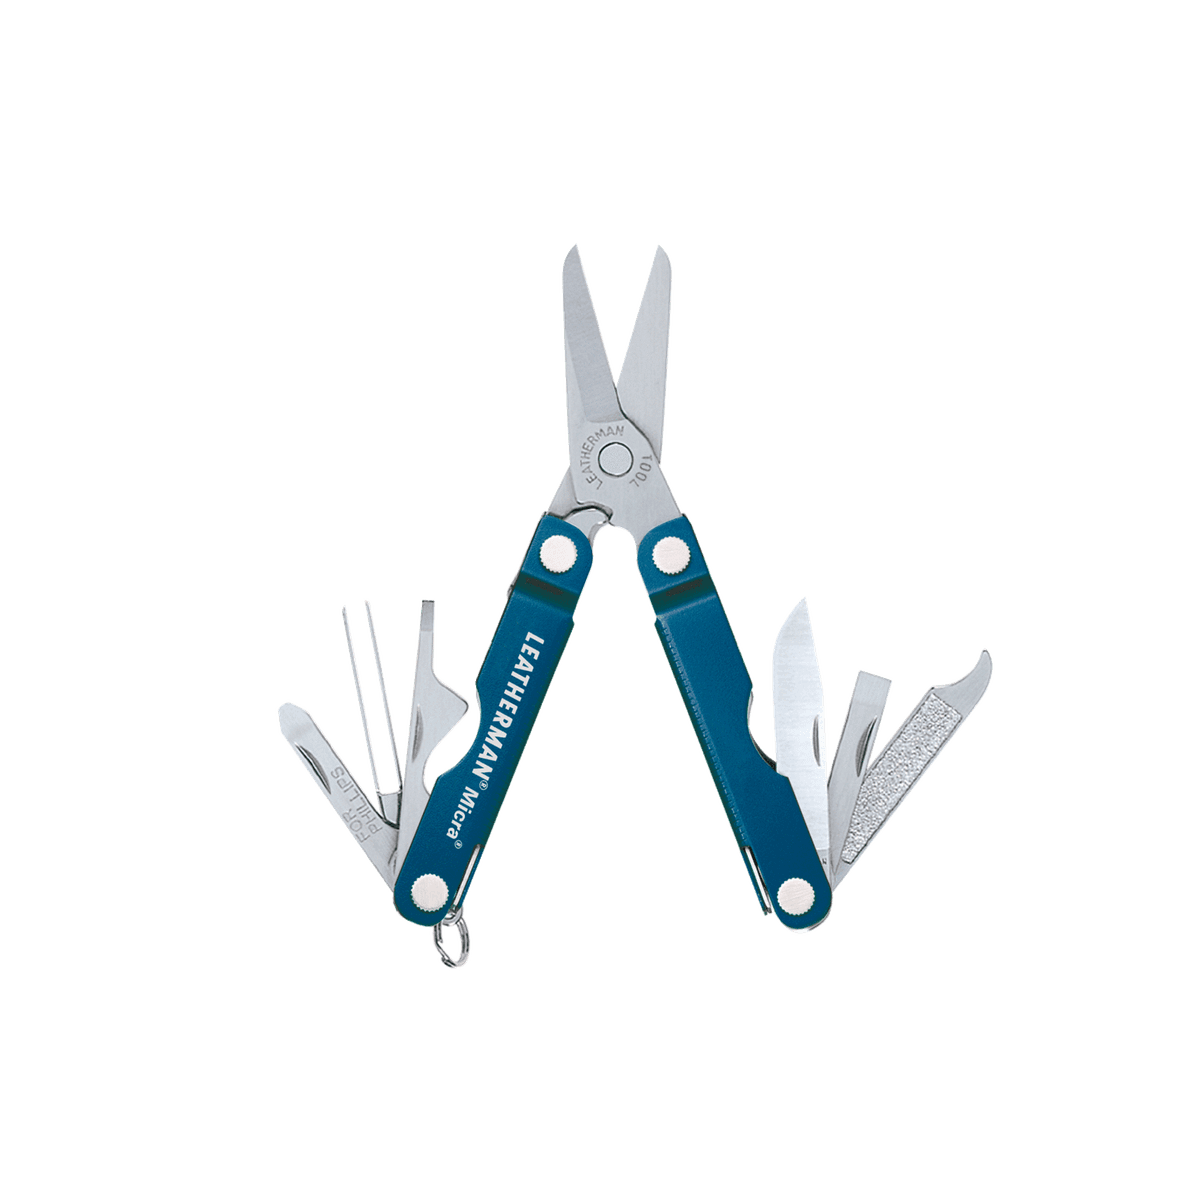 Leatherman's tiny, 1.8-ounce Micra multitool can be attached to a keychain. (Leatherman)